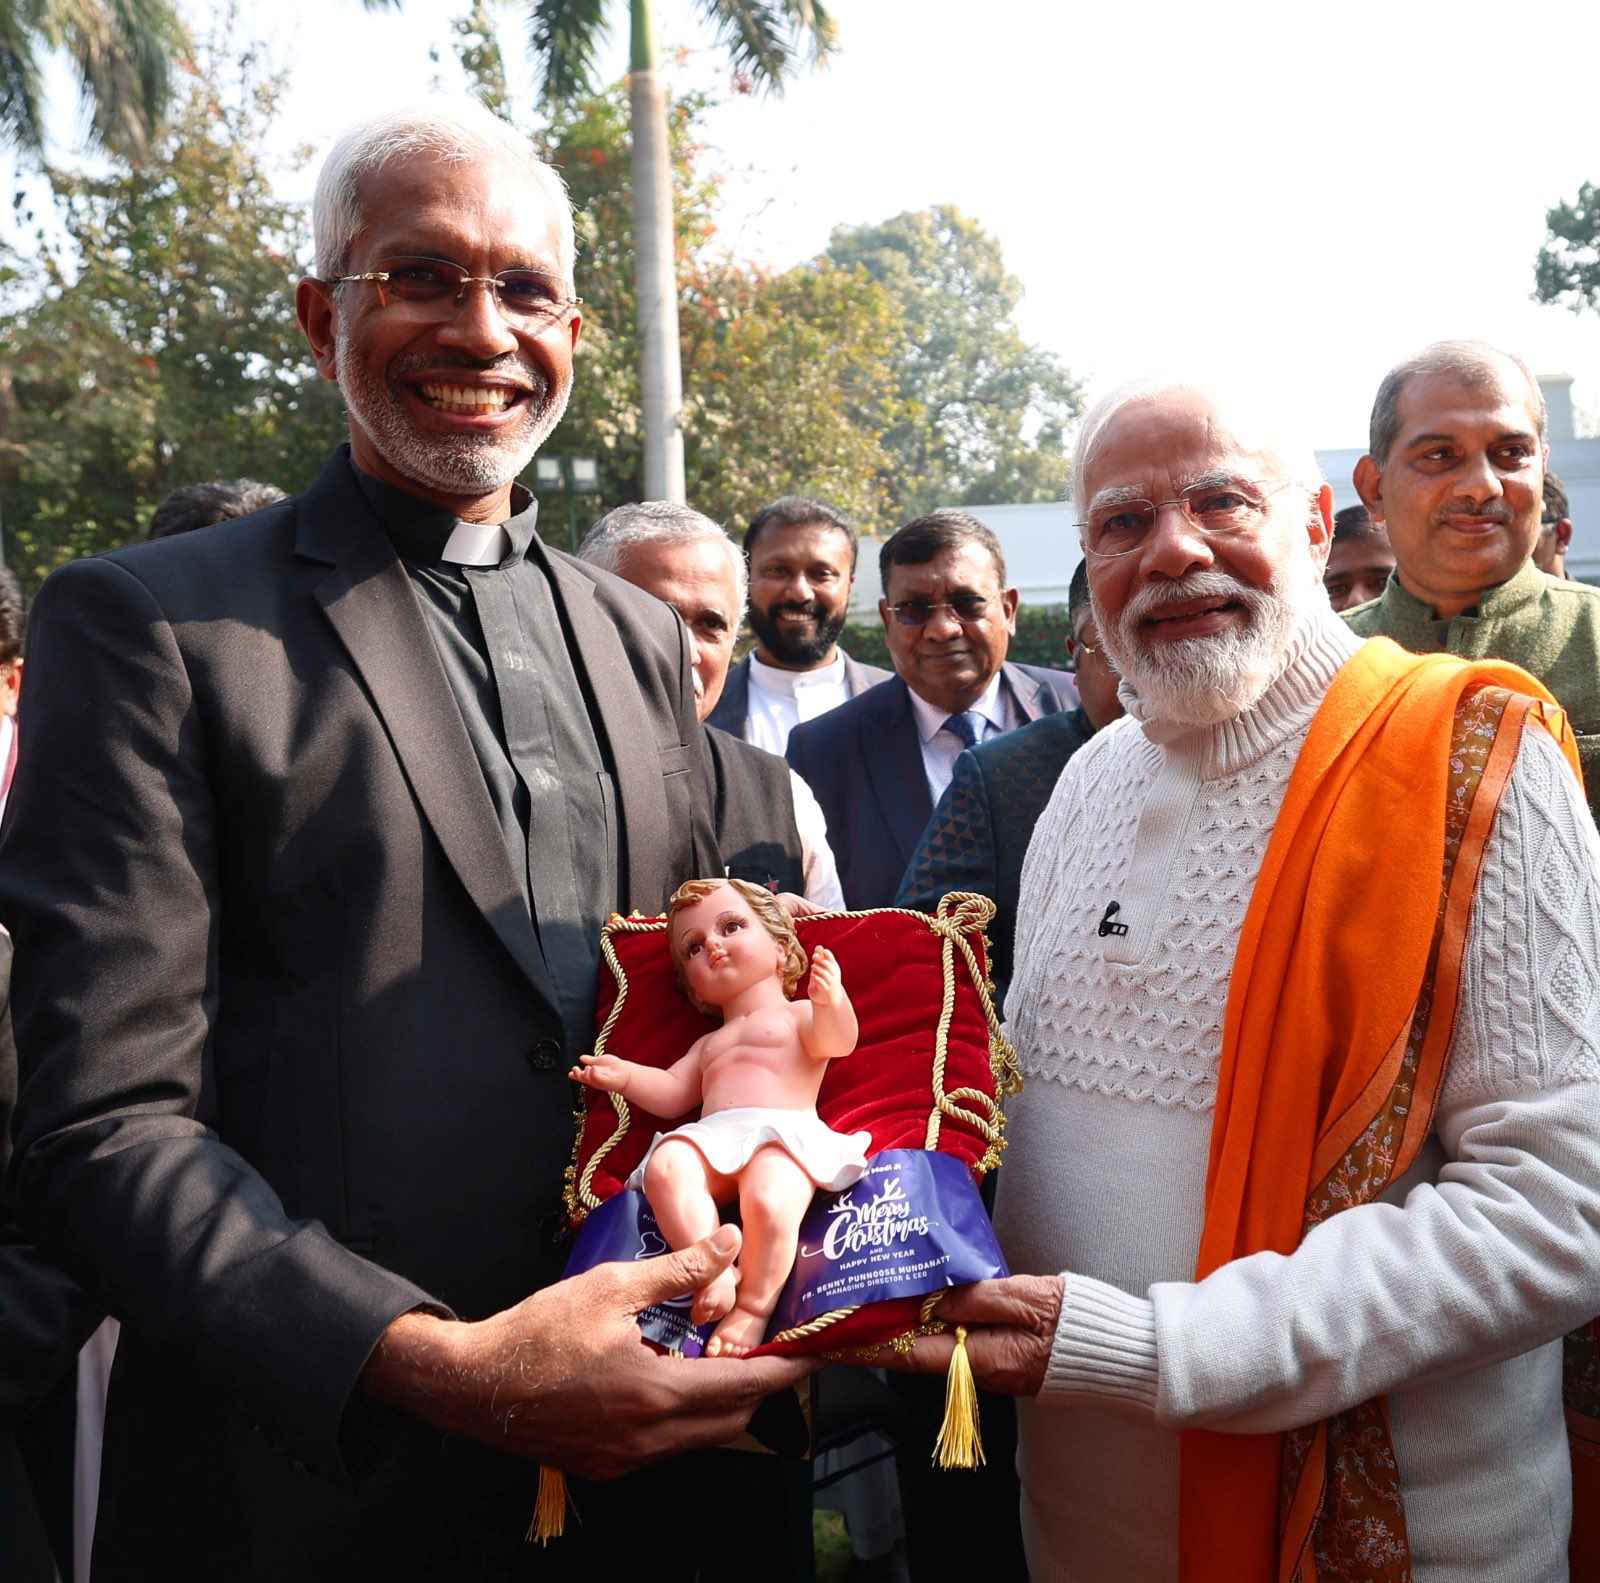 On Christmas day, Prime Minister Modi invited leaders of the Christian community (mainly prelates), some prominent businessmen and well-known figures from the film